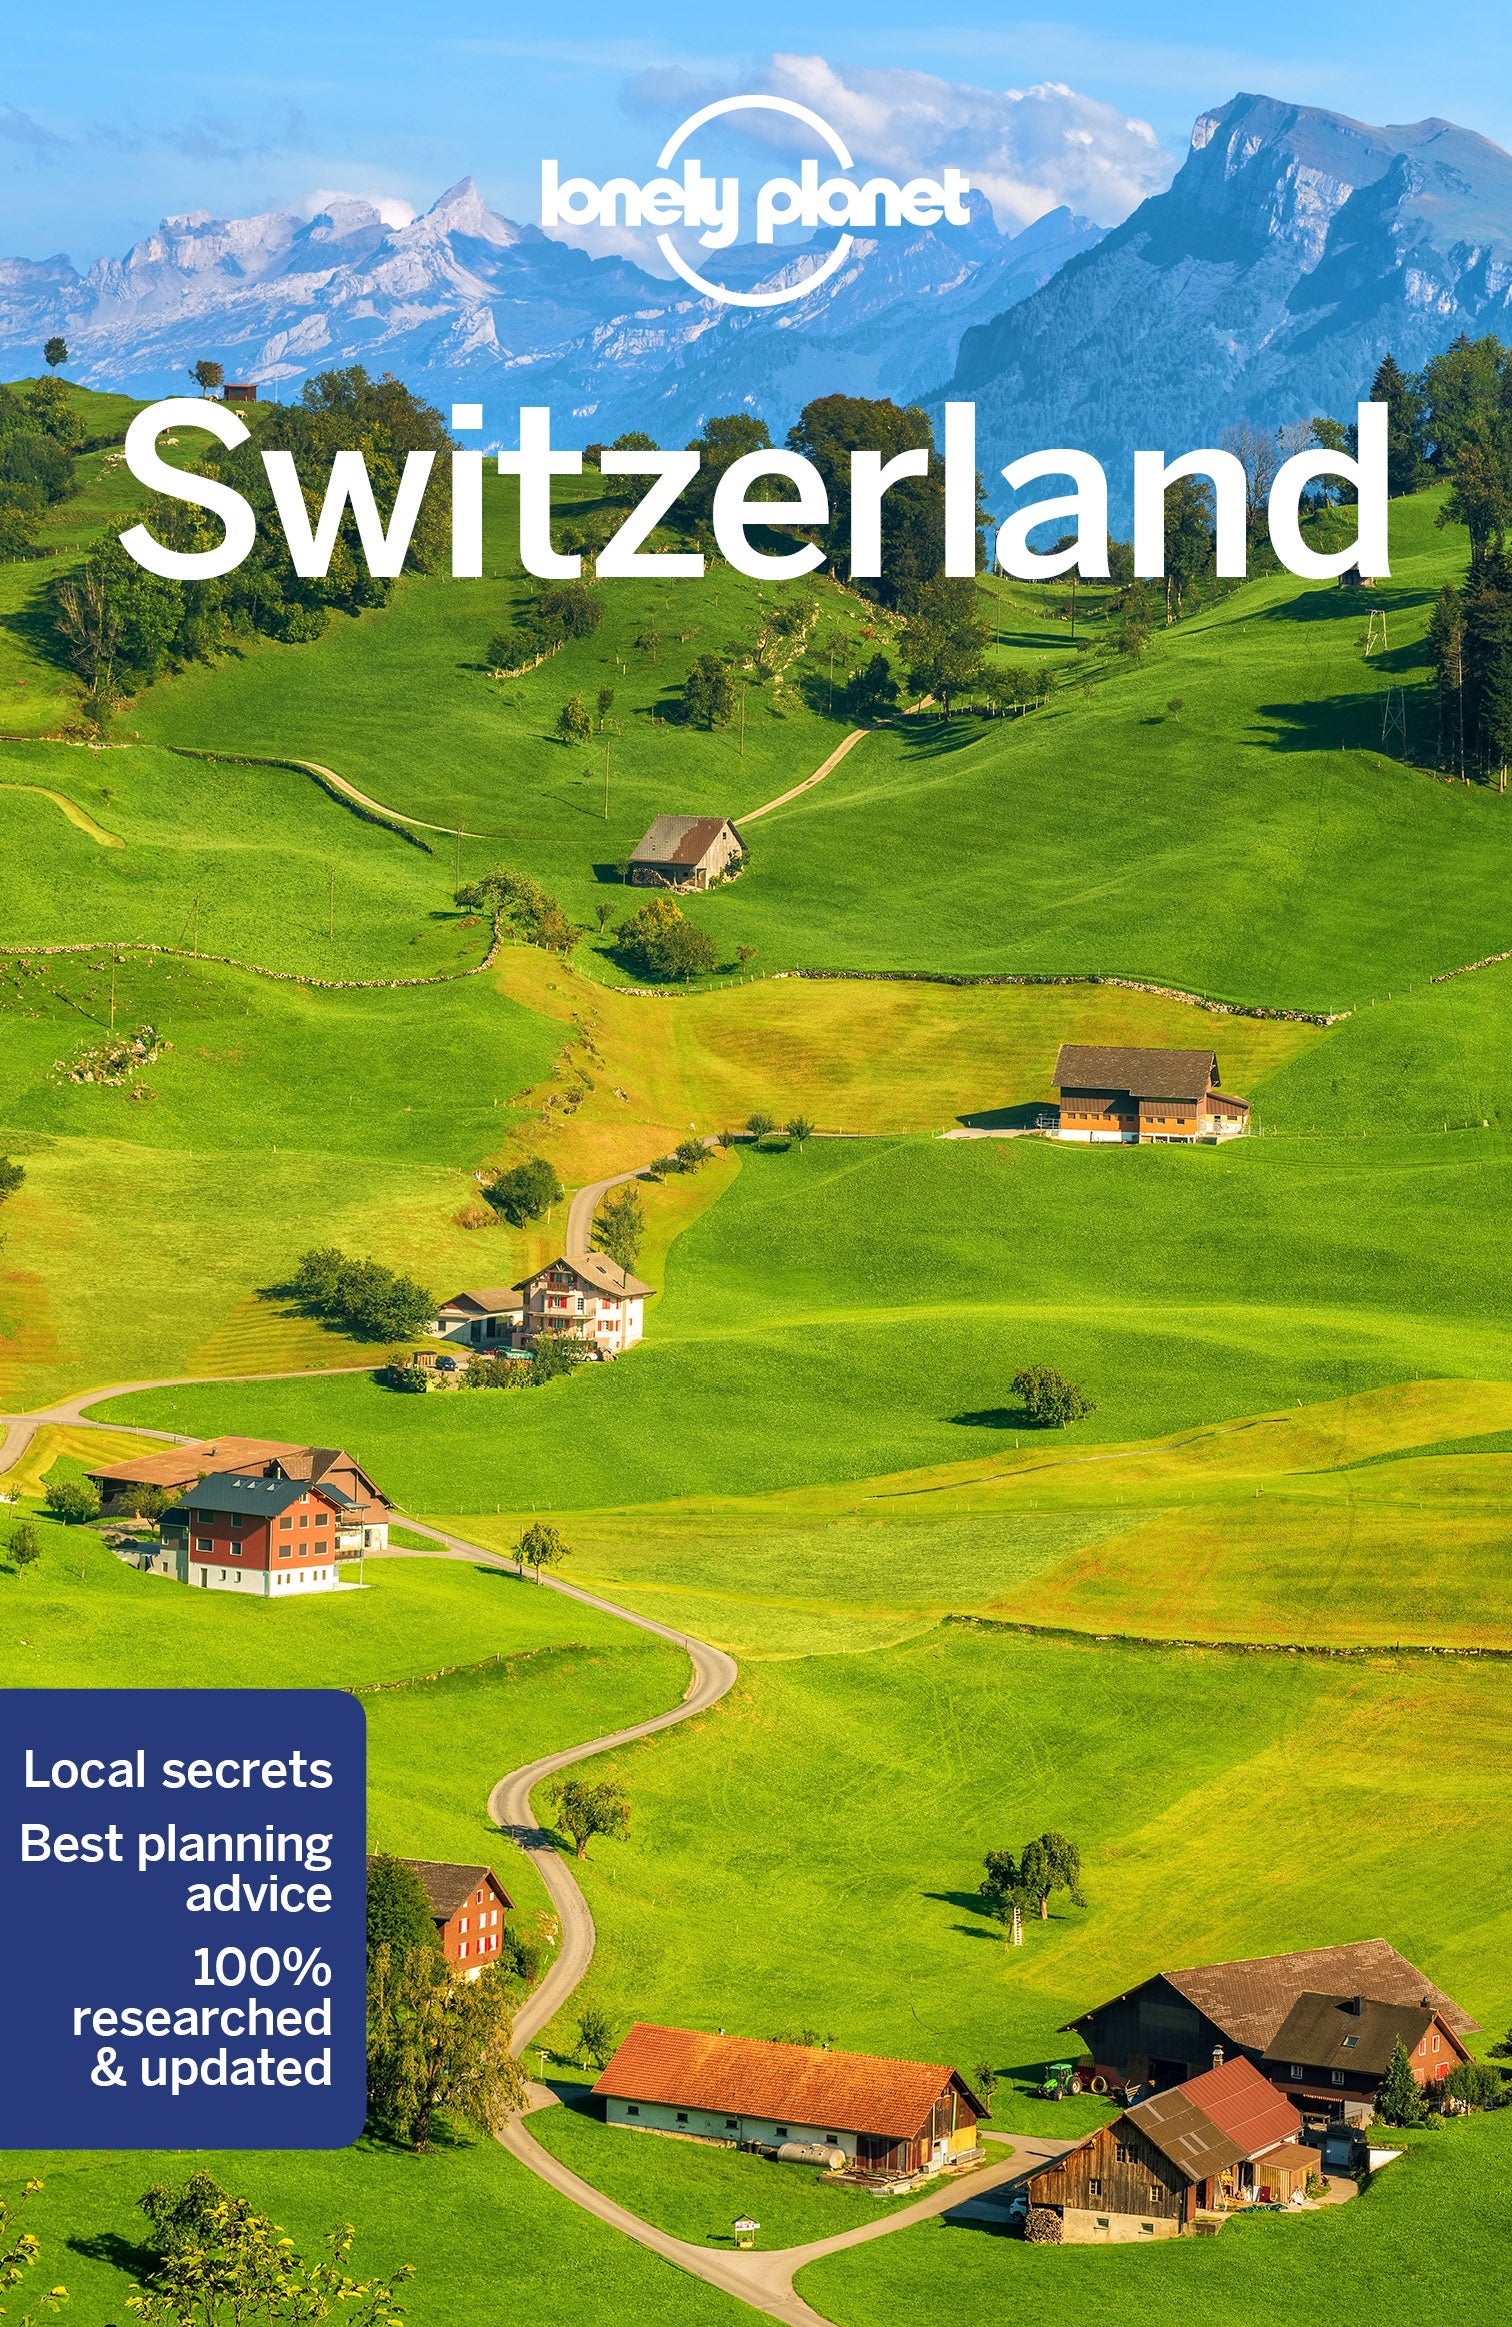 maps　MapsCompany　hiking　(in　Planet　Lonely　Travel　English)　Switzerland　Travel　and　Guide　–